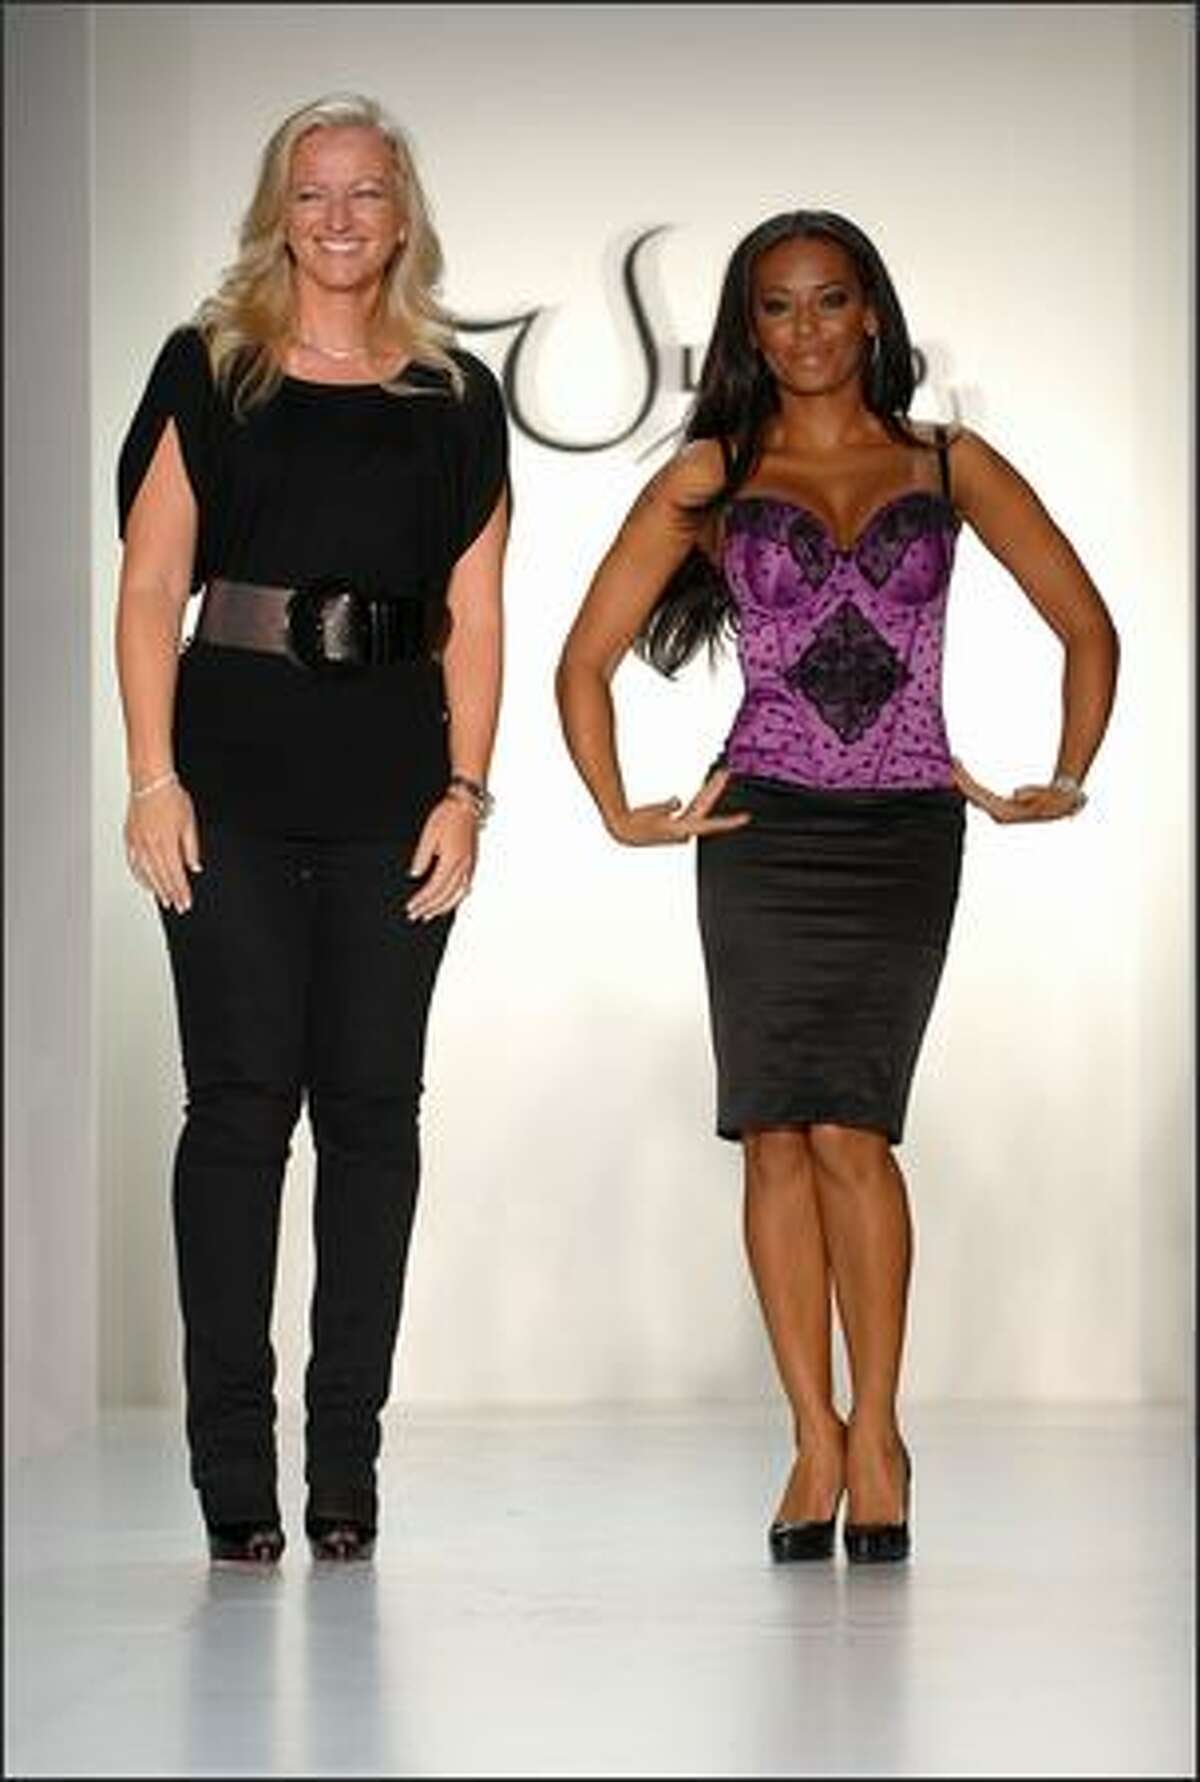 Ultimo Scottish designer lingerie brand founder Michelle, left, and pop singer Melanie Brown appear at the Mel B With Ultimo Spring 2009 fashion show during Mercedes-Benz Fashion Week at the Metropolitan Pavilion on Tuesday in New York City.